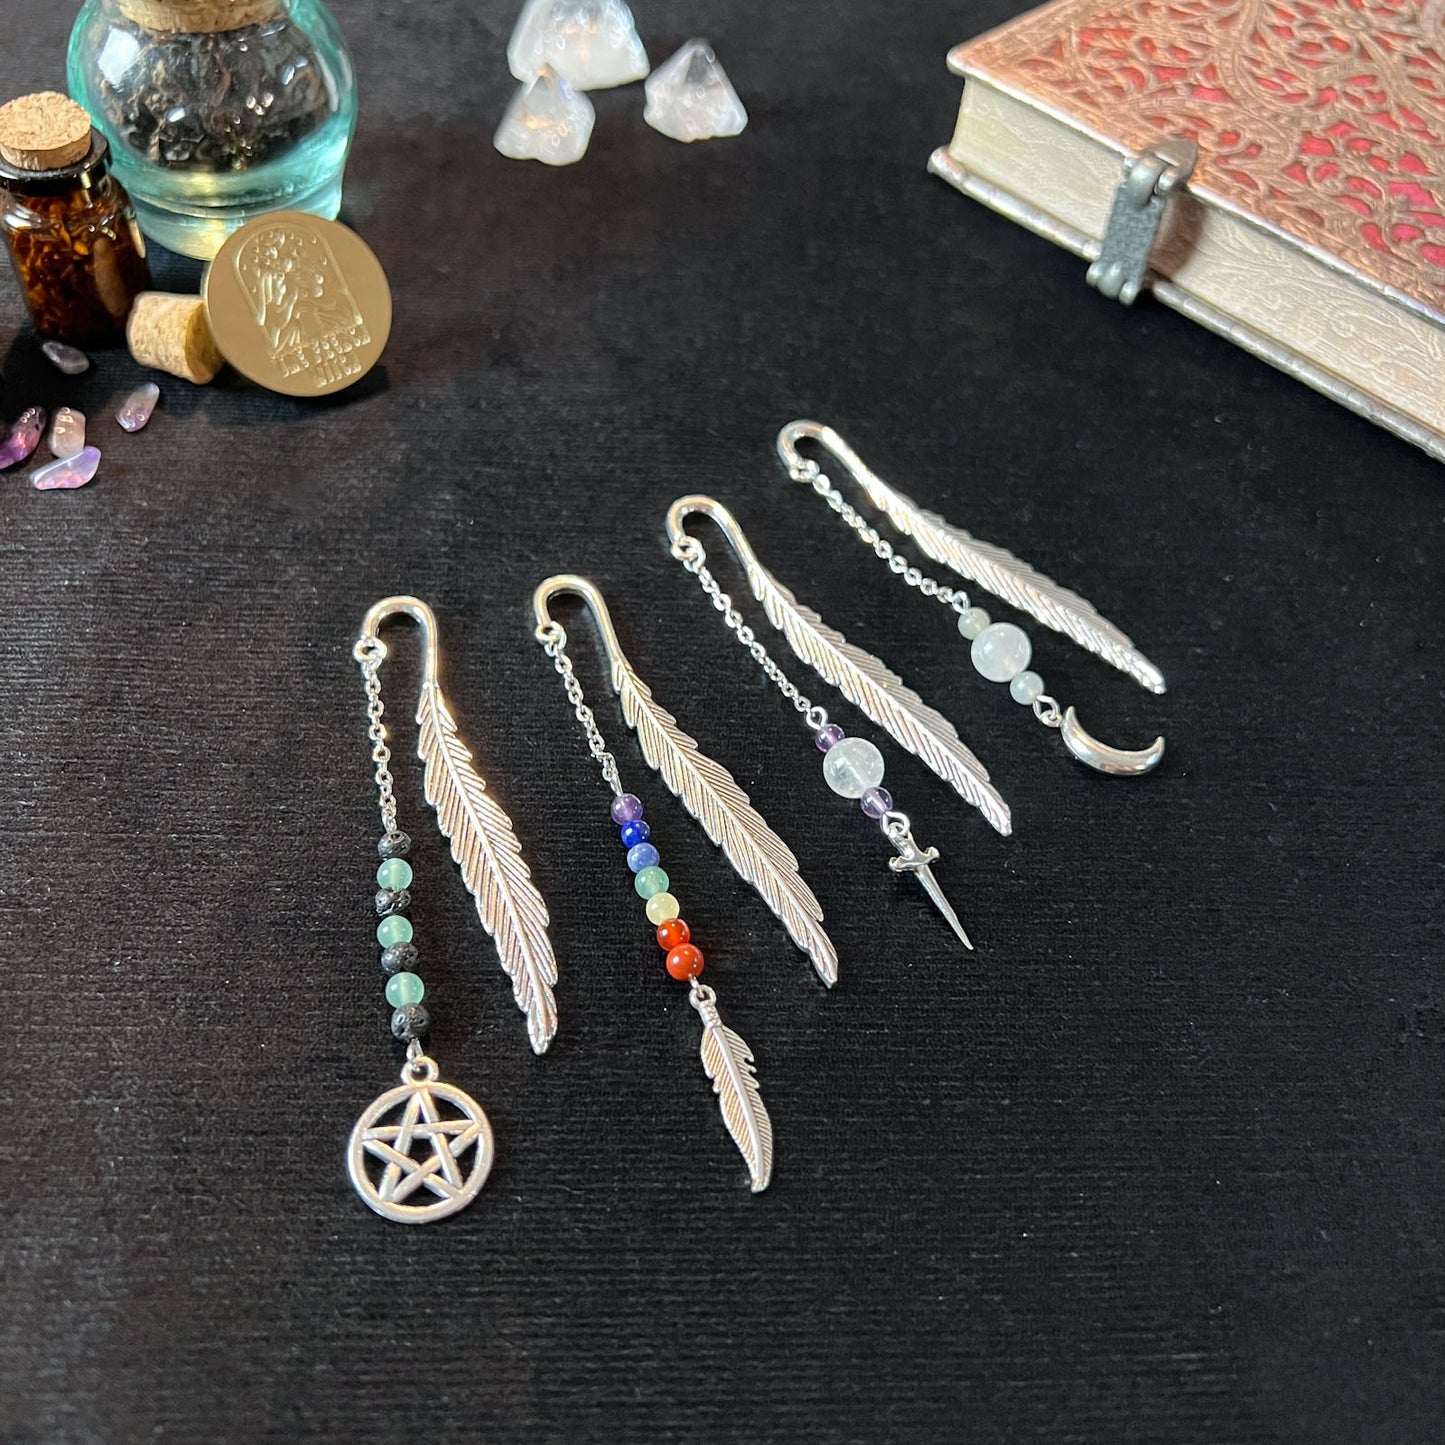 Small bookmark for your grimoire, book, journal, with gemstones and charms Baguette Magick